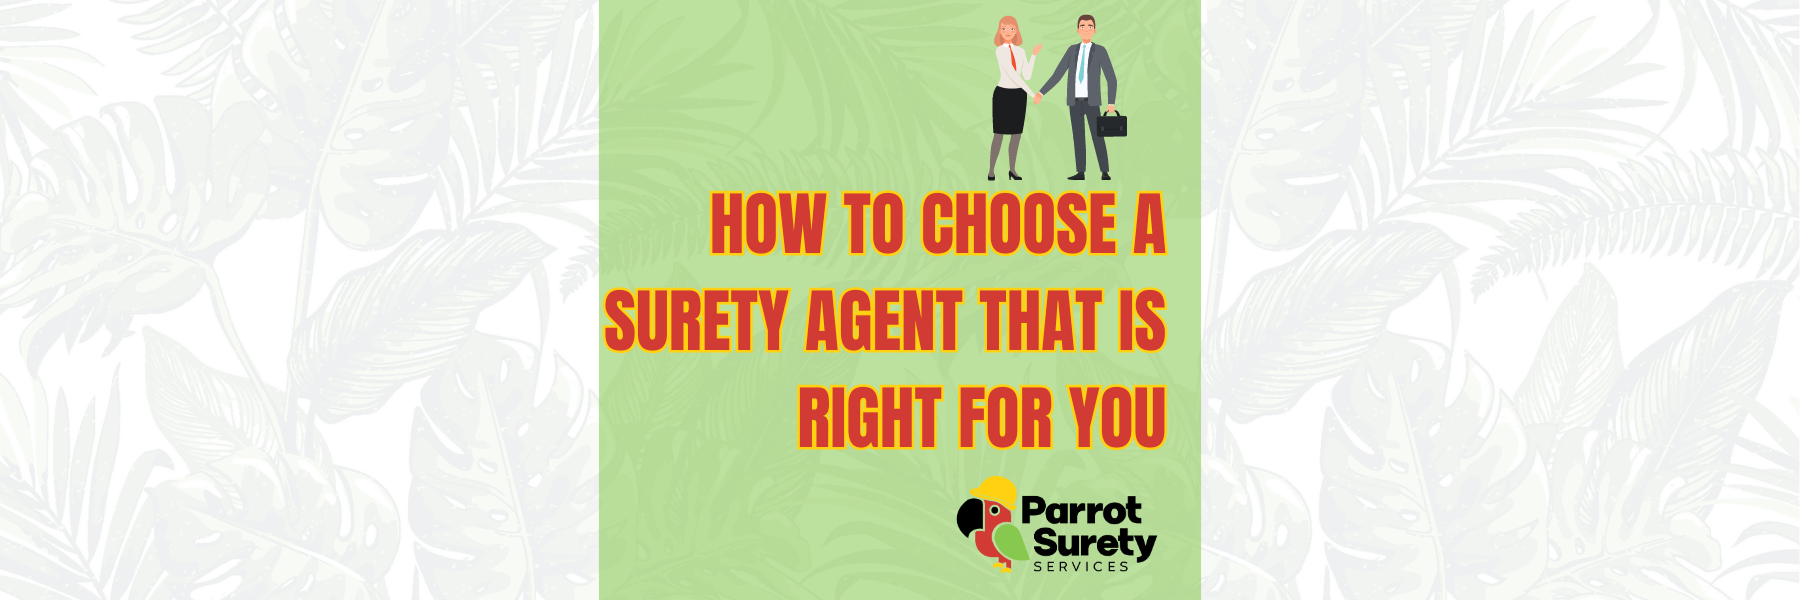 how to choose a surety agent that is right for you title image parrot surety services